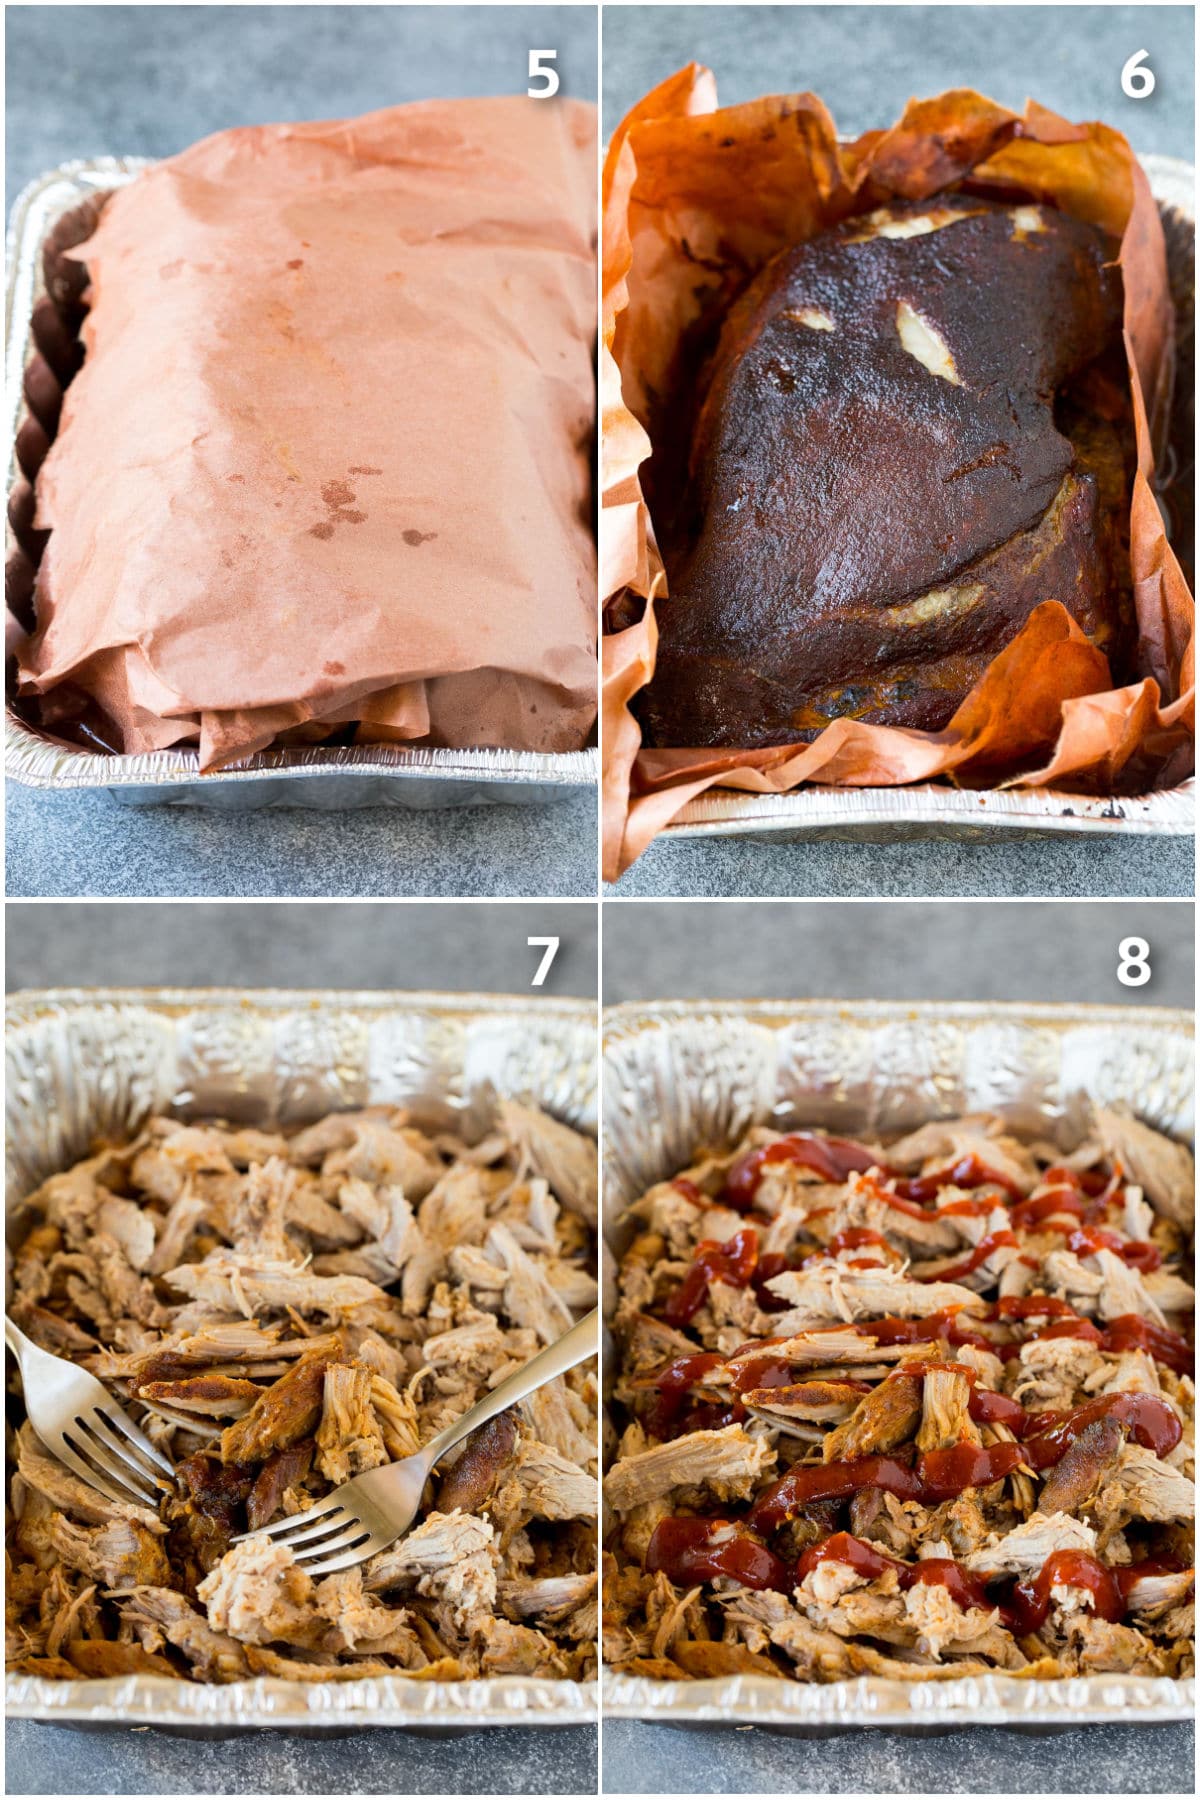 Step by step shots showing how to smoke pulled pork.